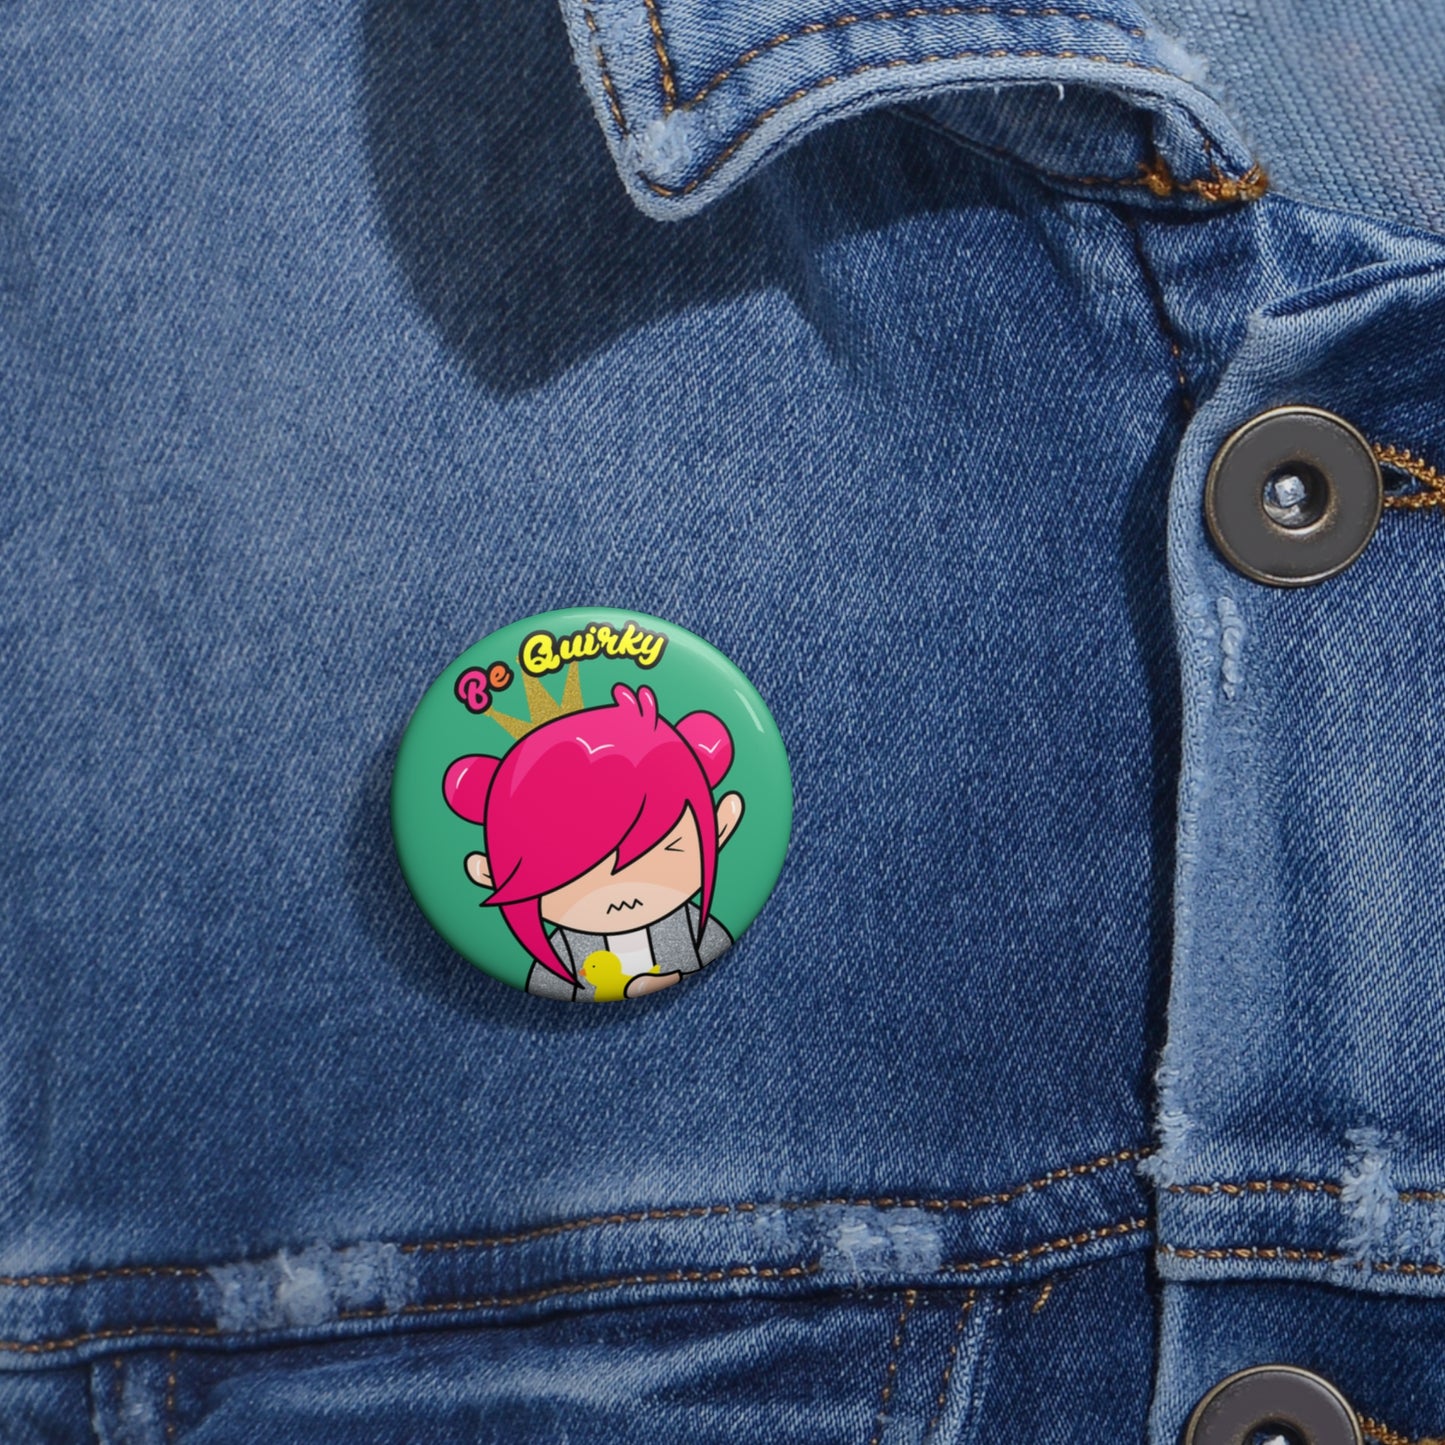 AlphaBetty Be Quirky Pin Buttons